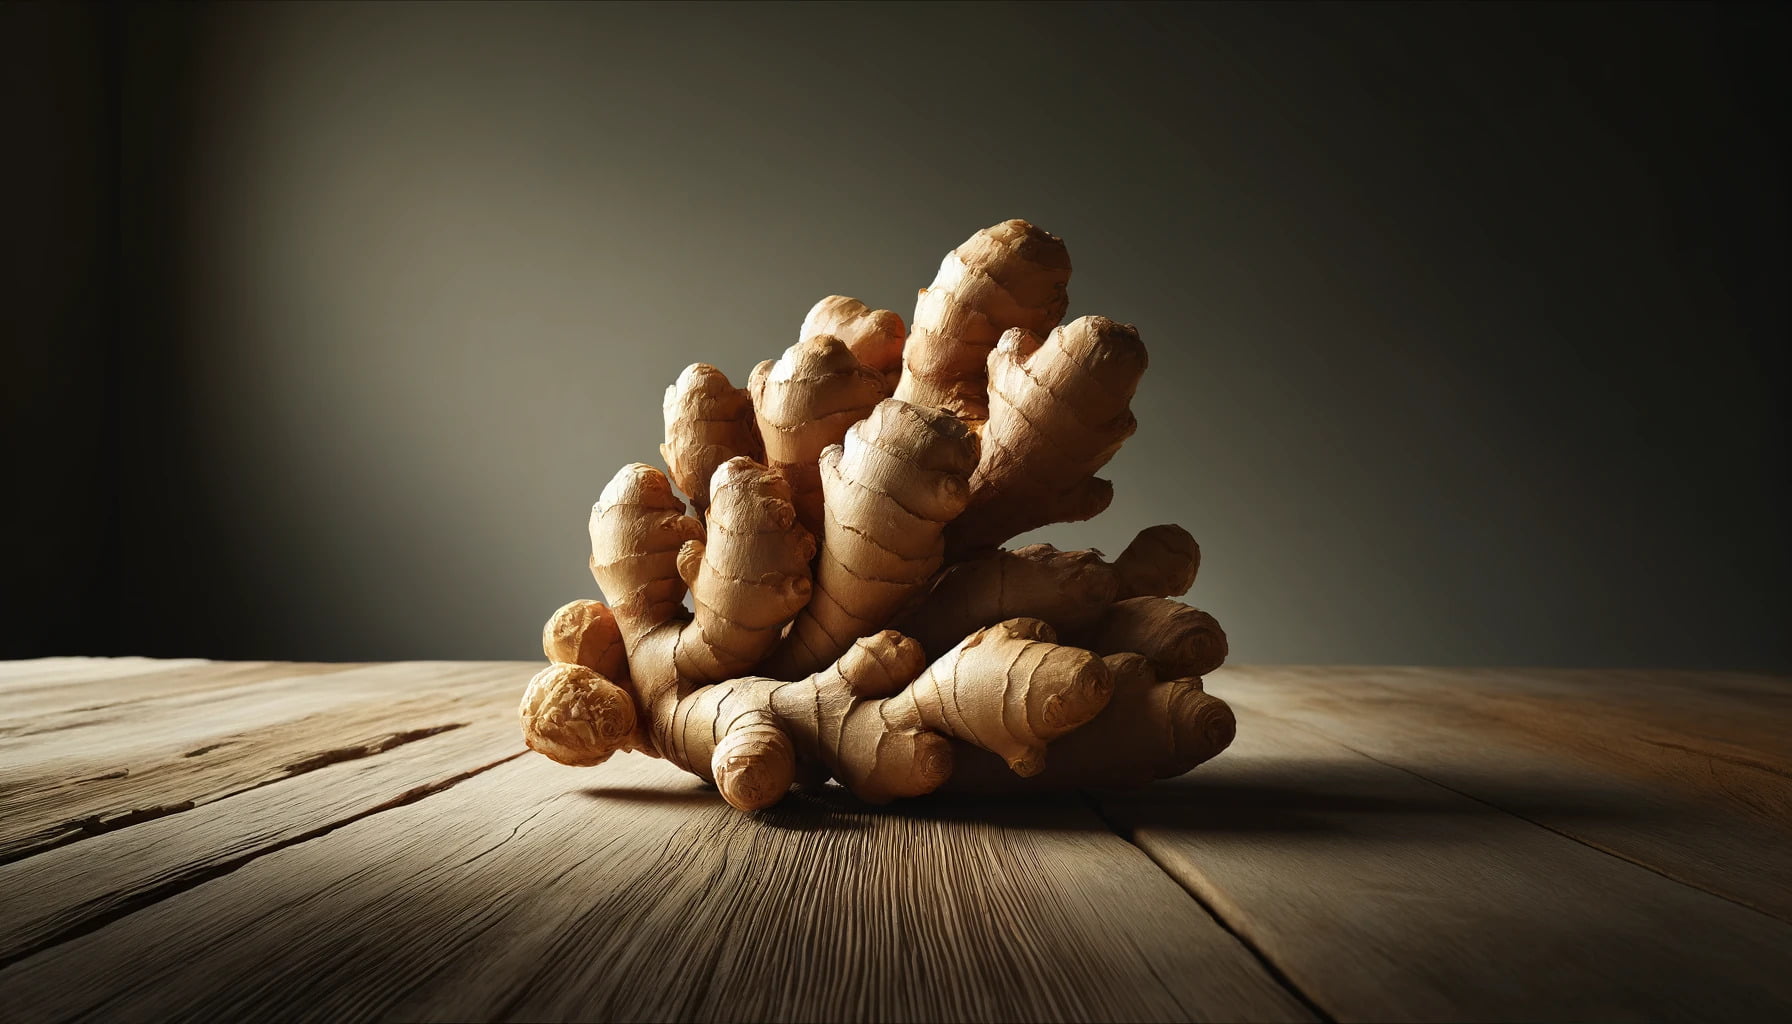  A photorealistic image of fresh ginger roots on a wooden surface.